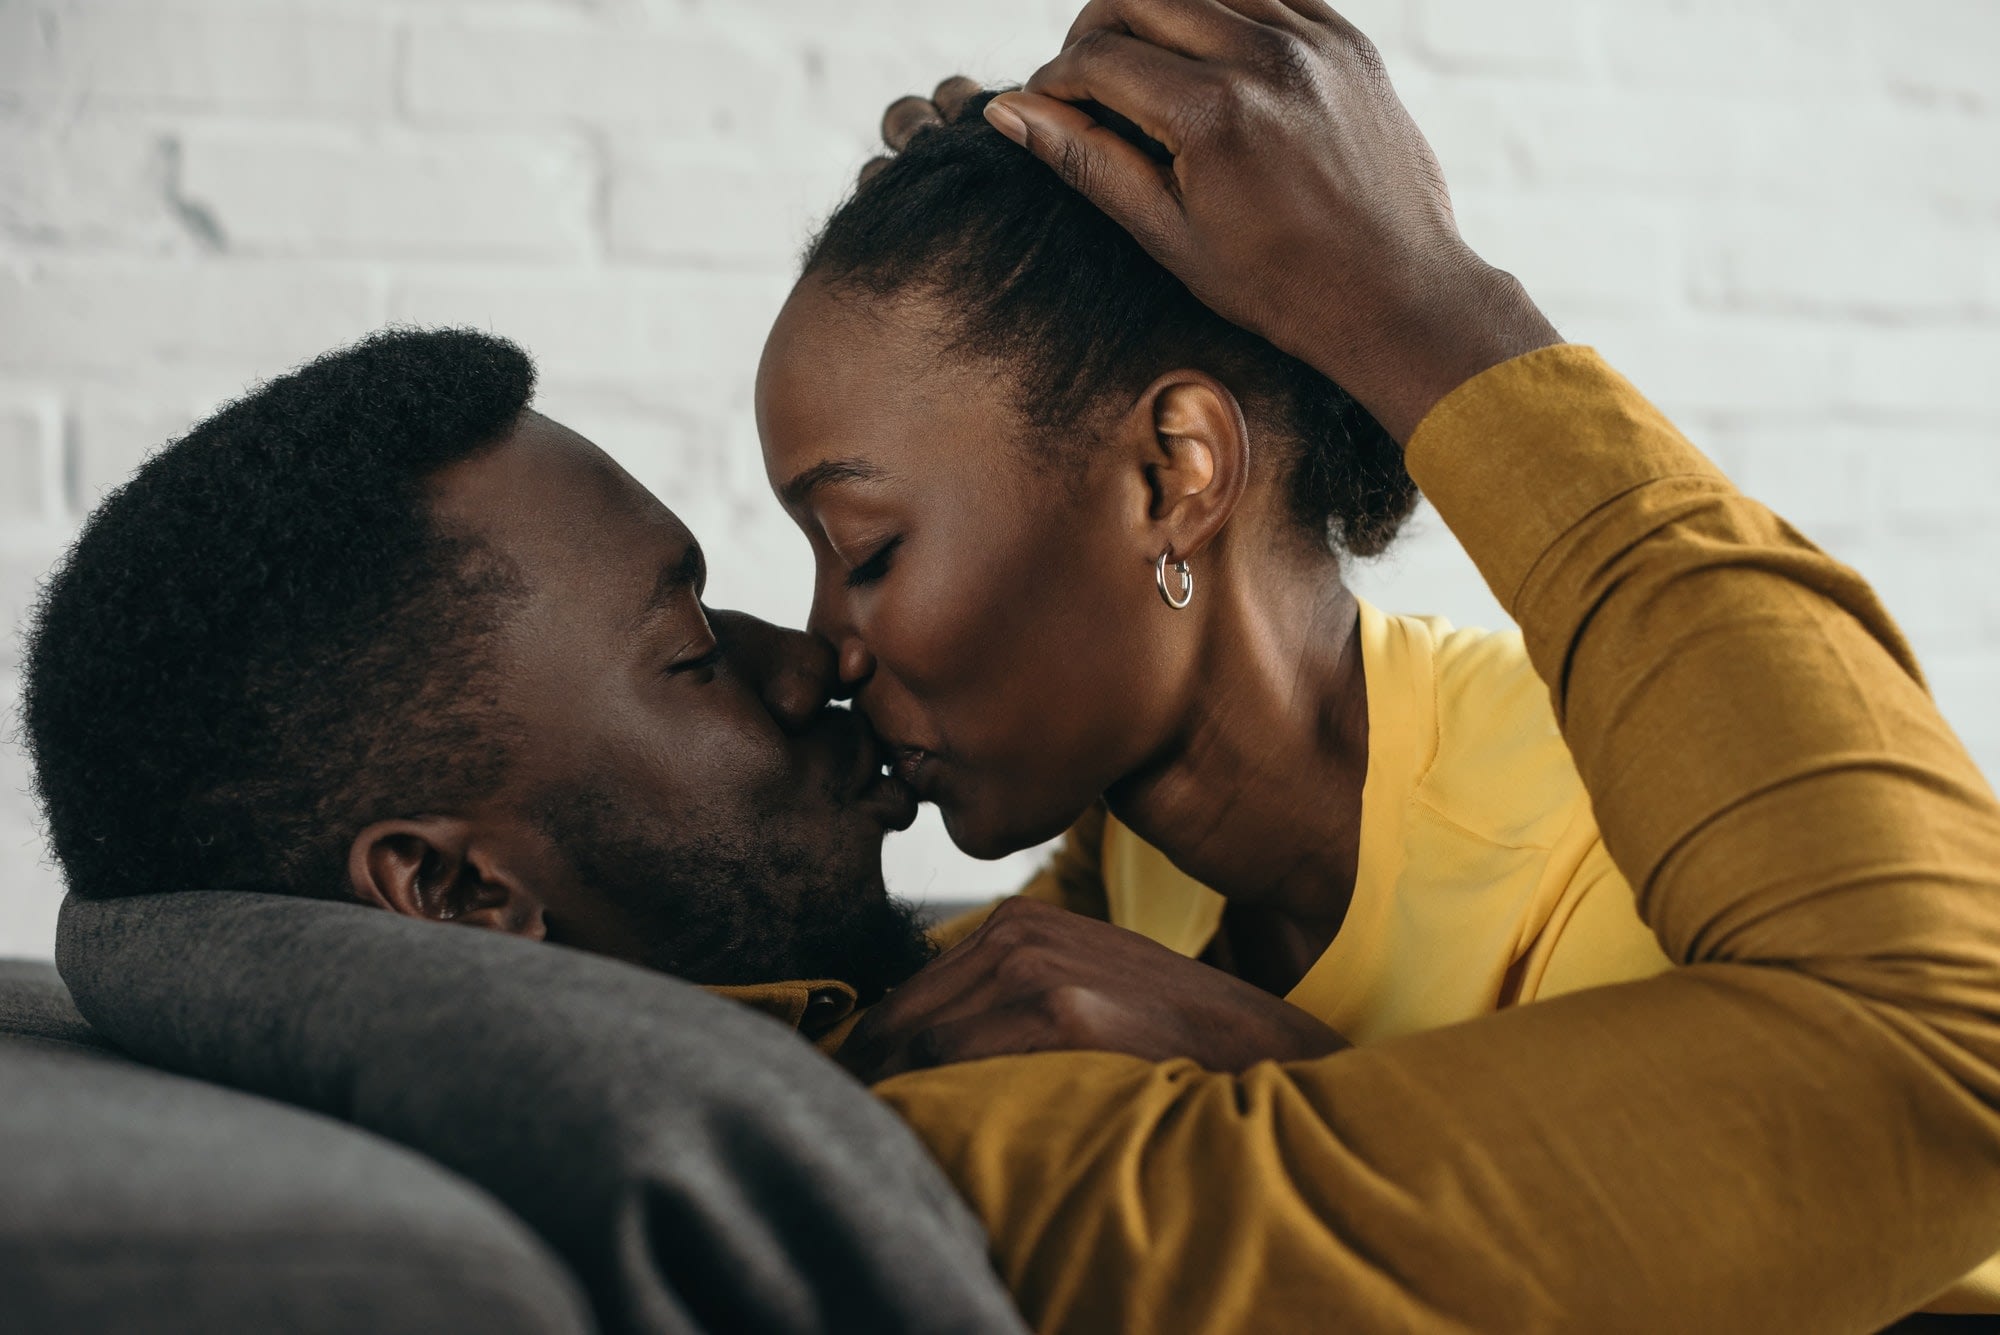 Revive Your Romance with a Four-Letter Word revive your romance with a four-letter word Revive Your Romance with a Four-Letter Word beautiful young african american couple kissing at home home Home beautiful young african american couple kissing at home